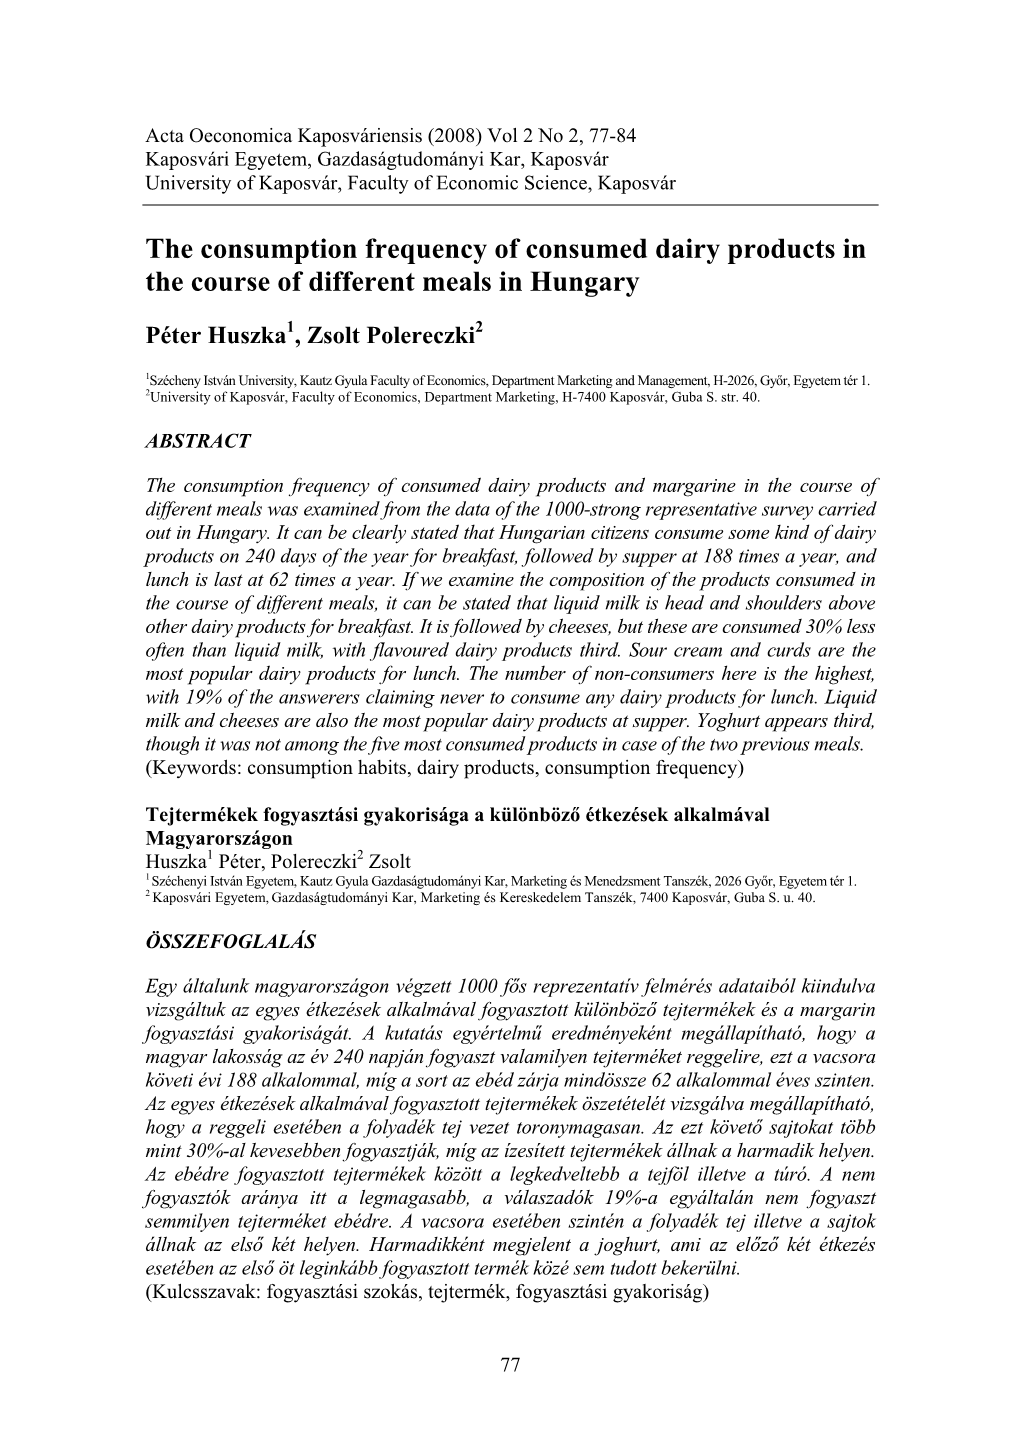 The Consumption Frequency of Consumed Dairy Products in the Course of Different Meals in Hungary